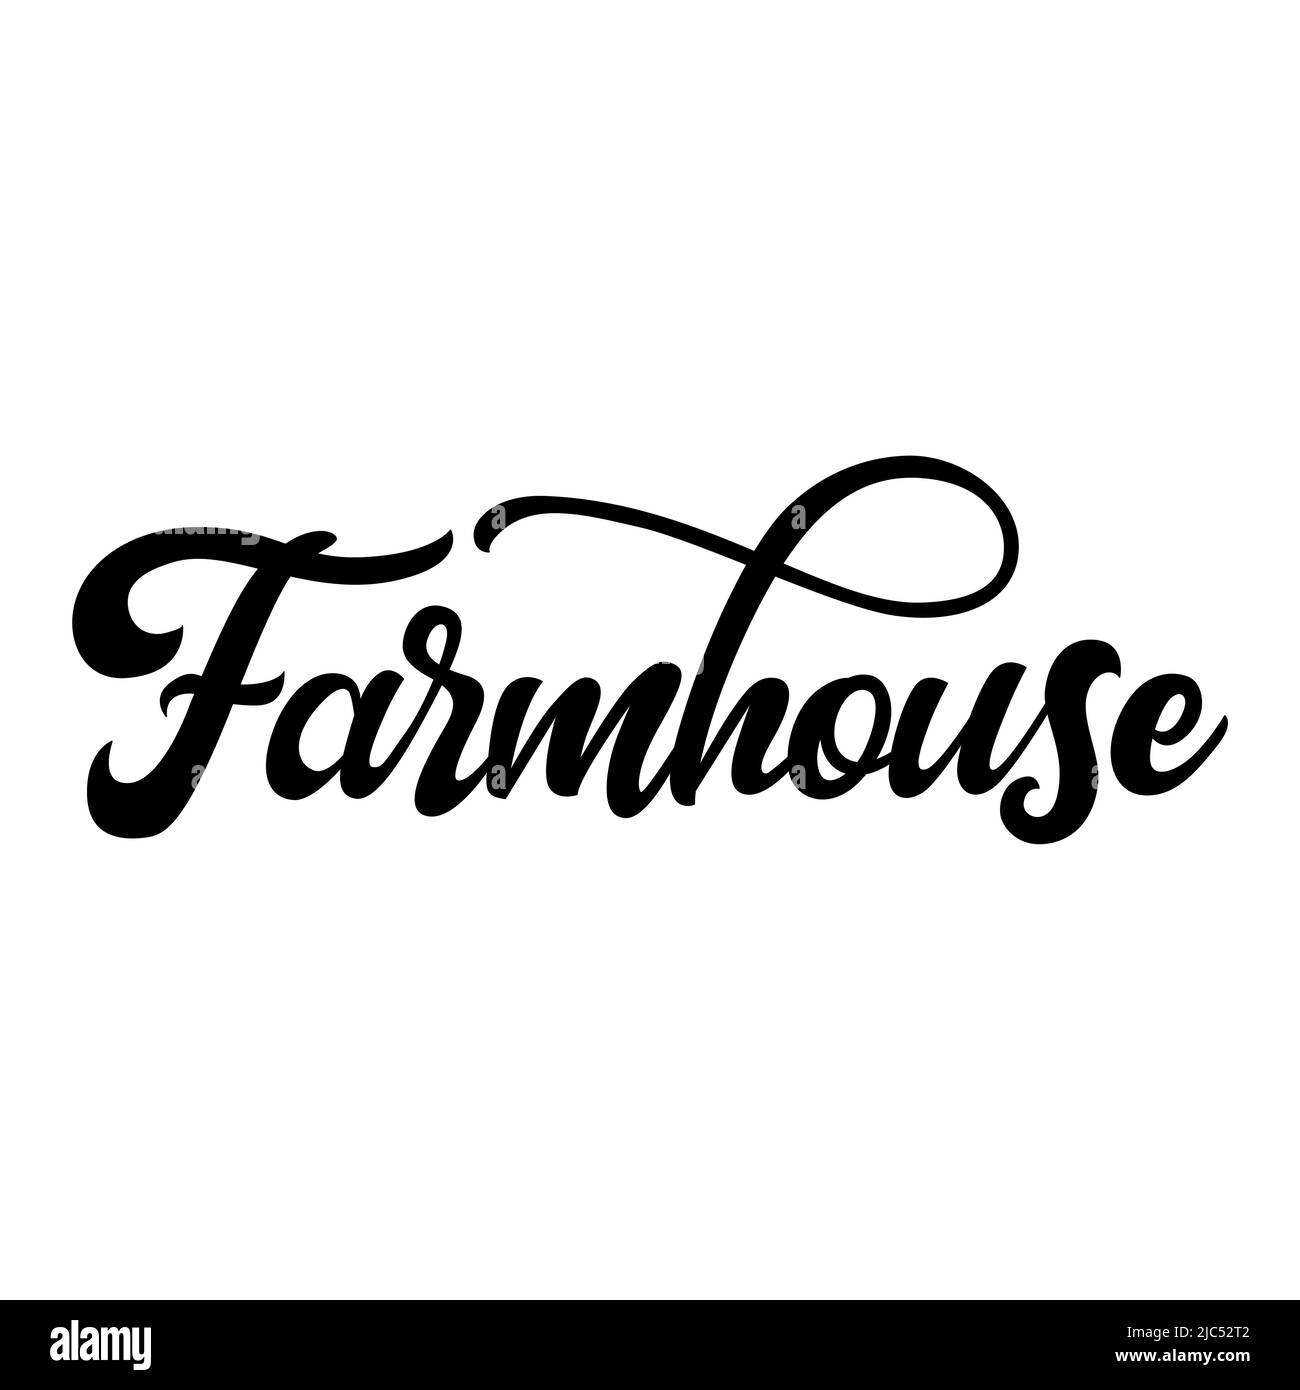 Farmhouse velcome sign. Kitchen home country graphic design. Vector poster text type Stock Vector